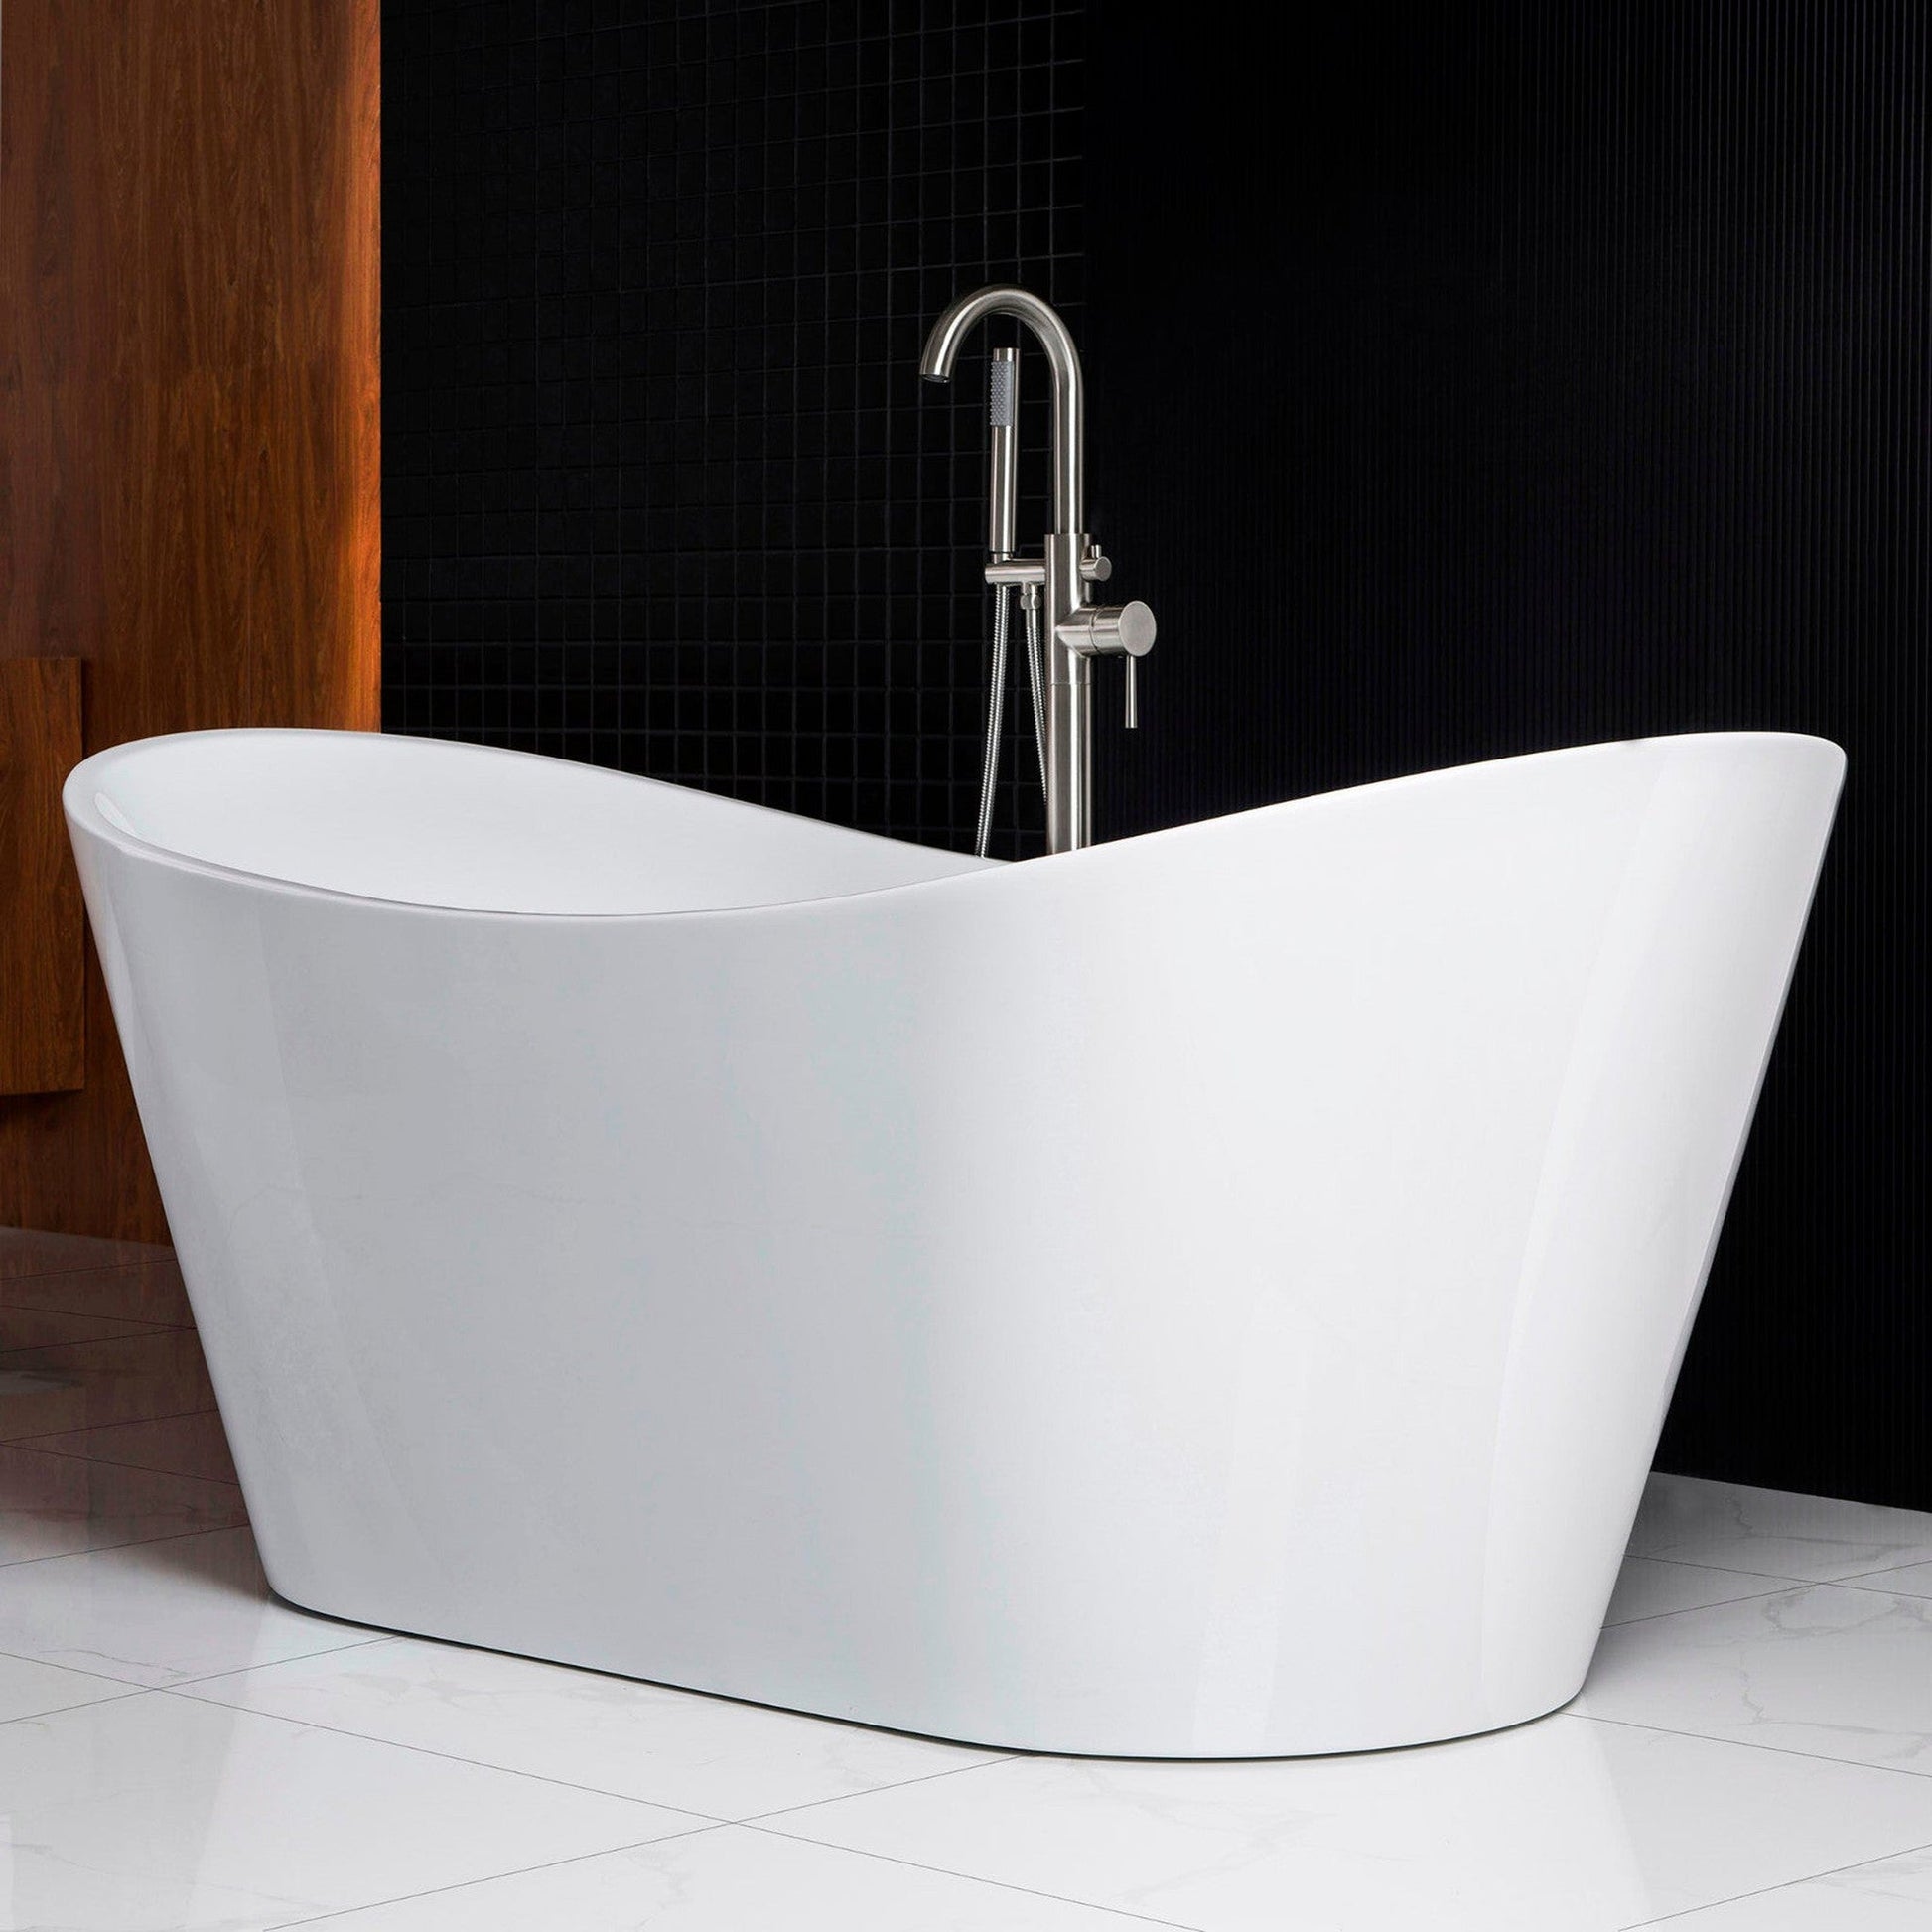 WoodBridge B0010 67" White Acrylic Freestanding Contemporary Soaking Bathtub With Brushed Nickel Drain, Overflow, F0023BNVT Tub Filler and Caddy Tray